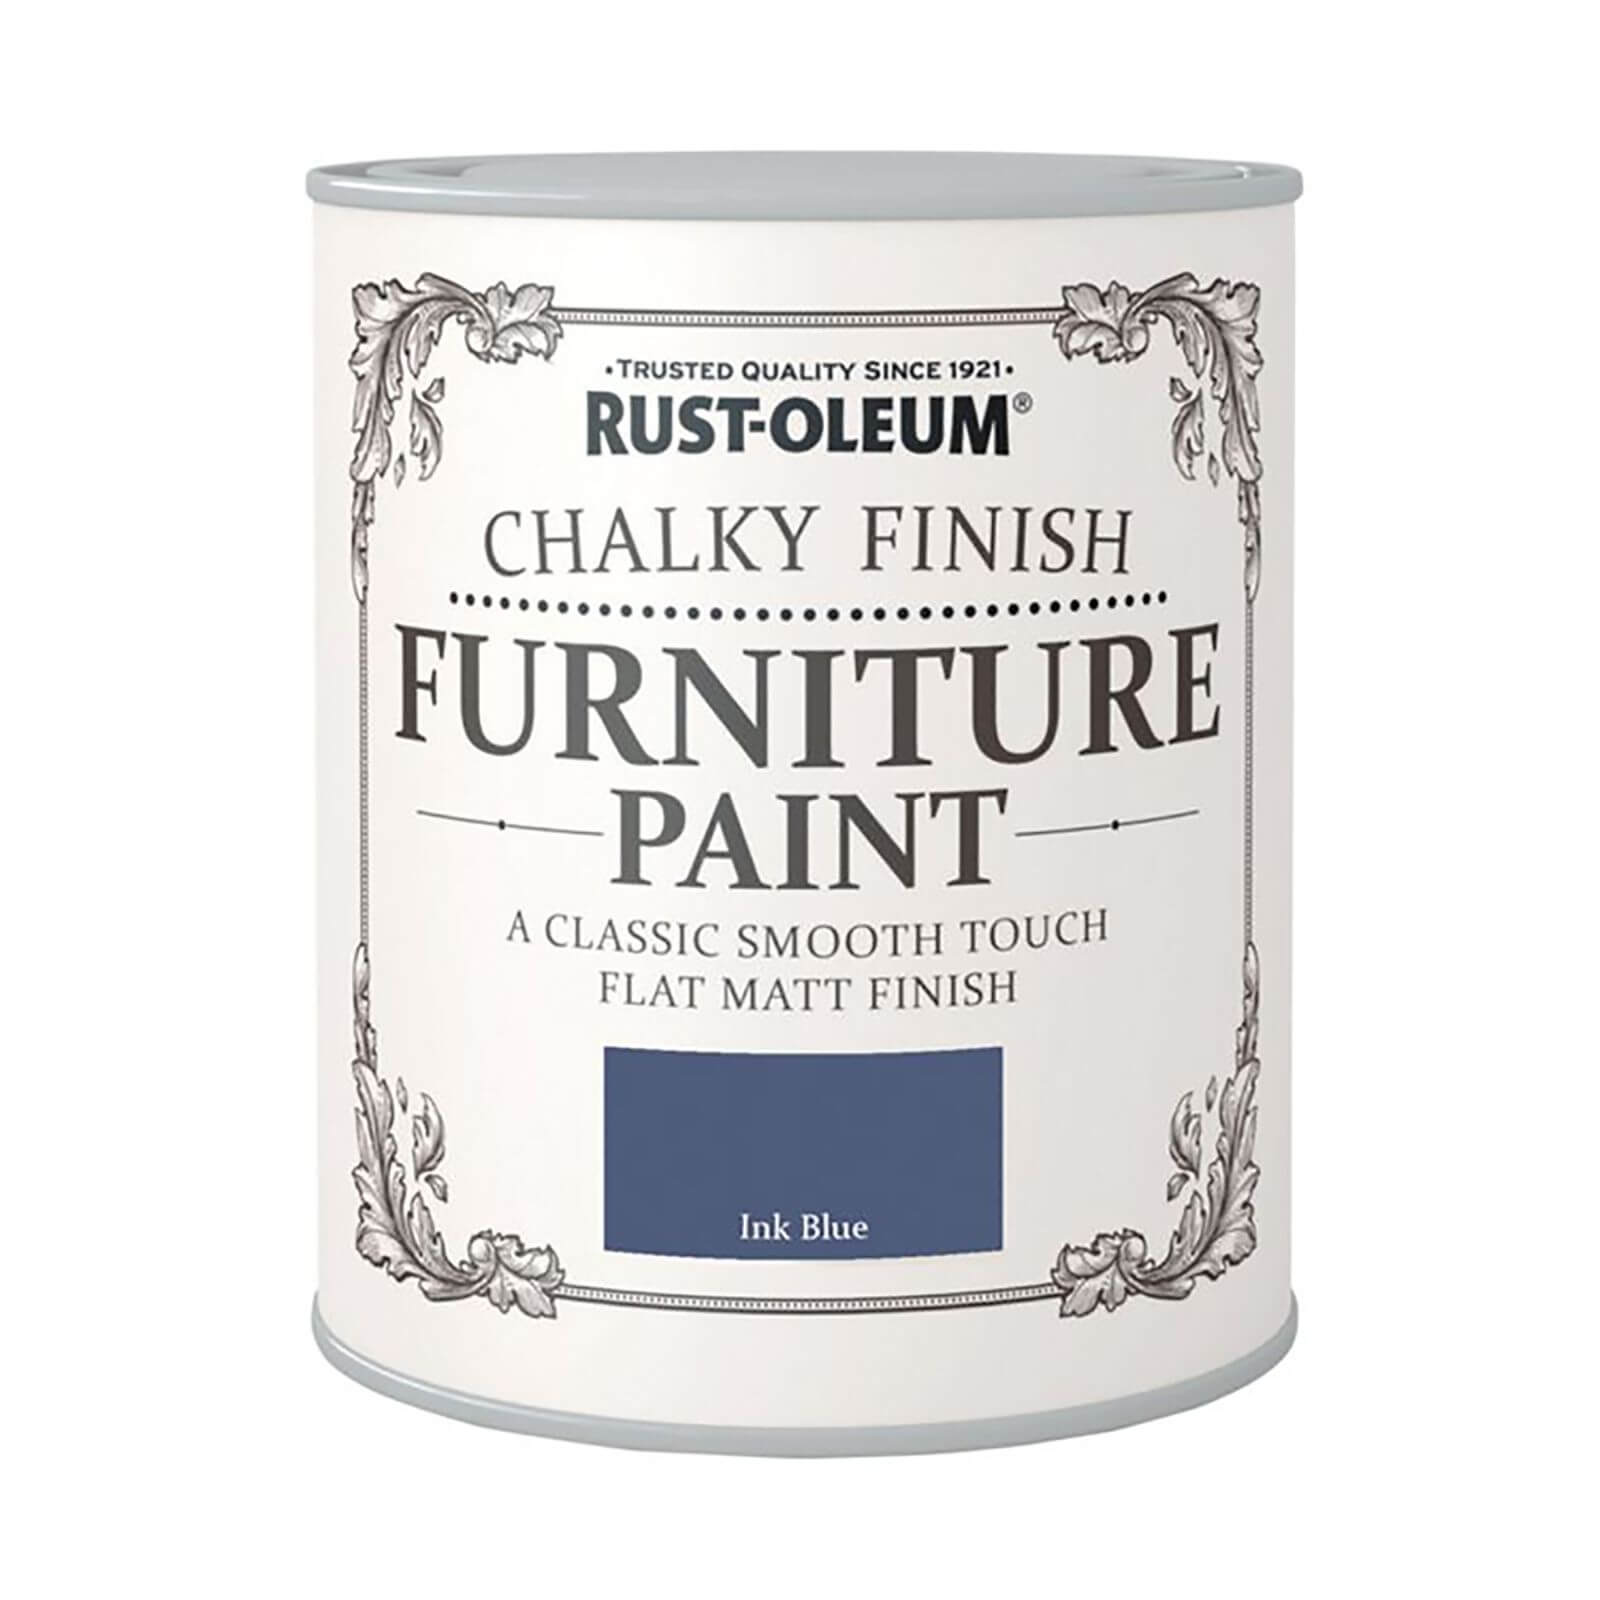 Rust-Oleum Chalky Finish Furniture Paint Ink Blue - 125ml